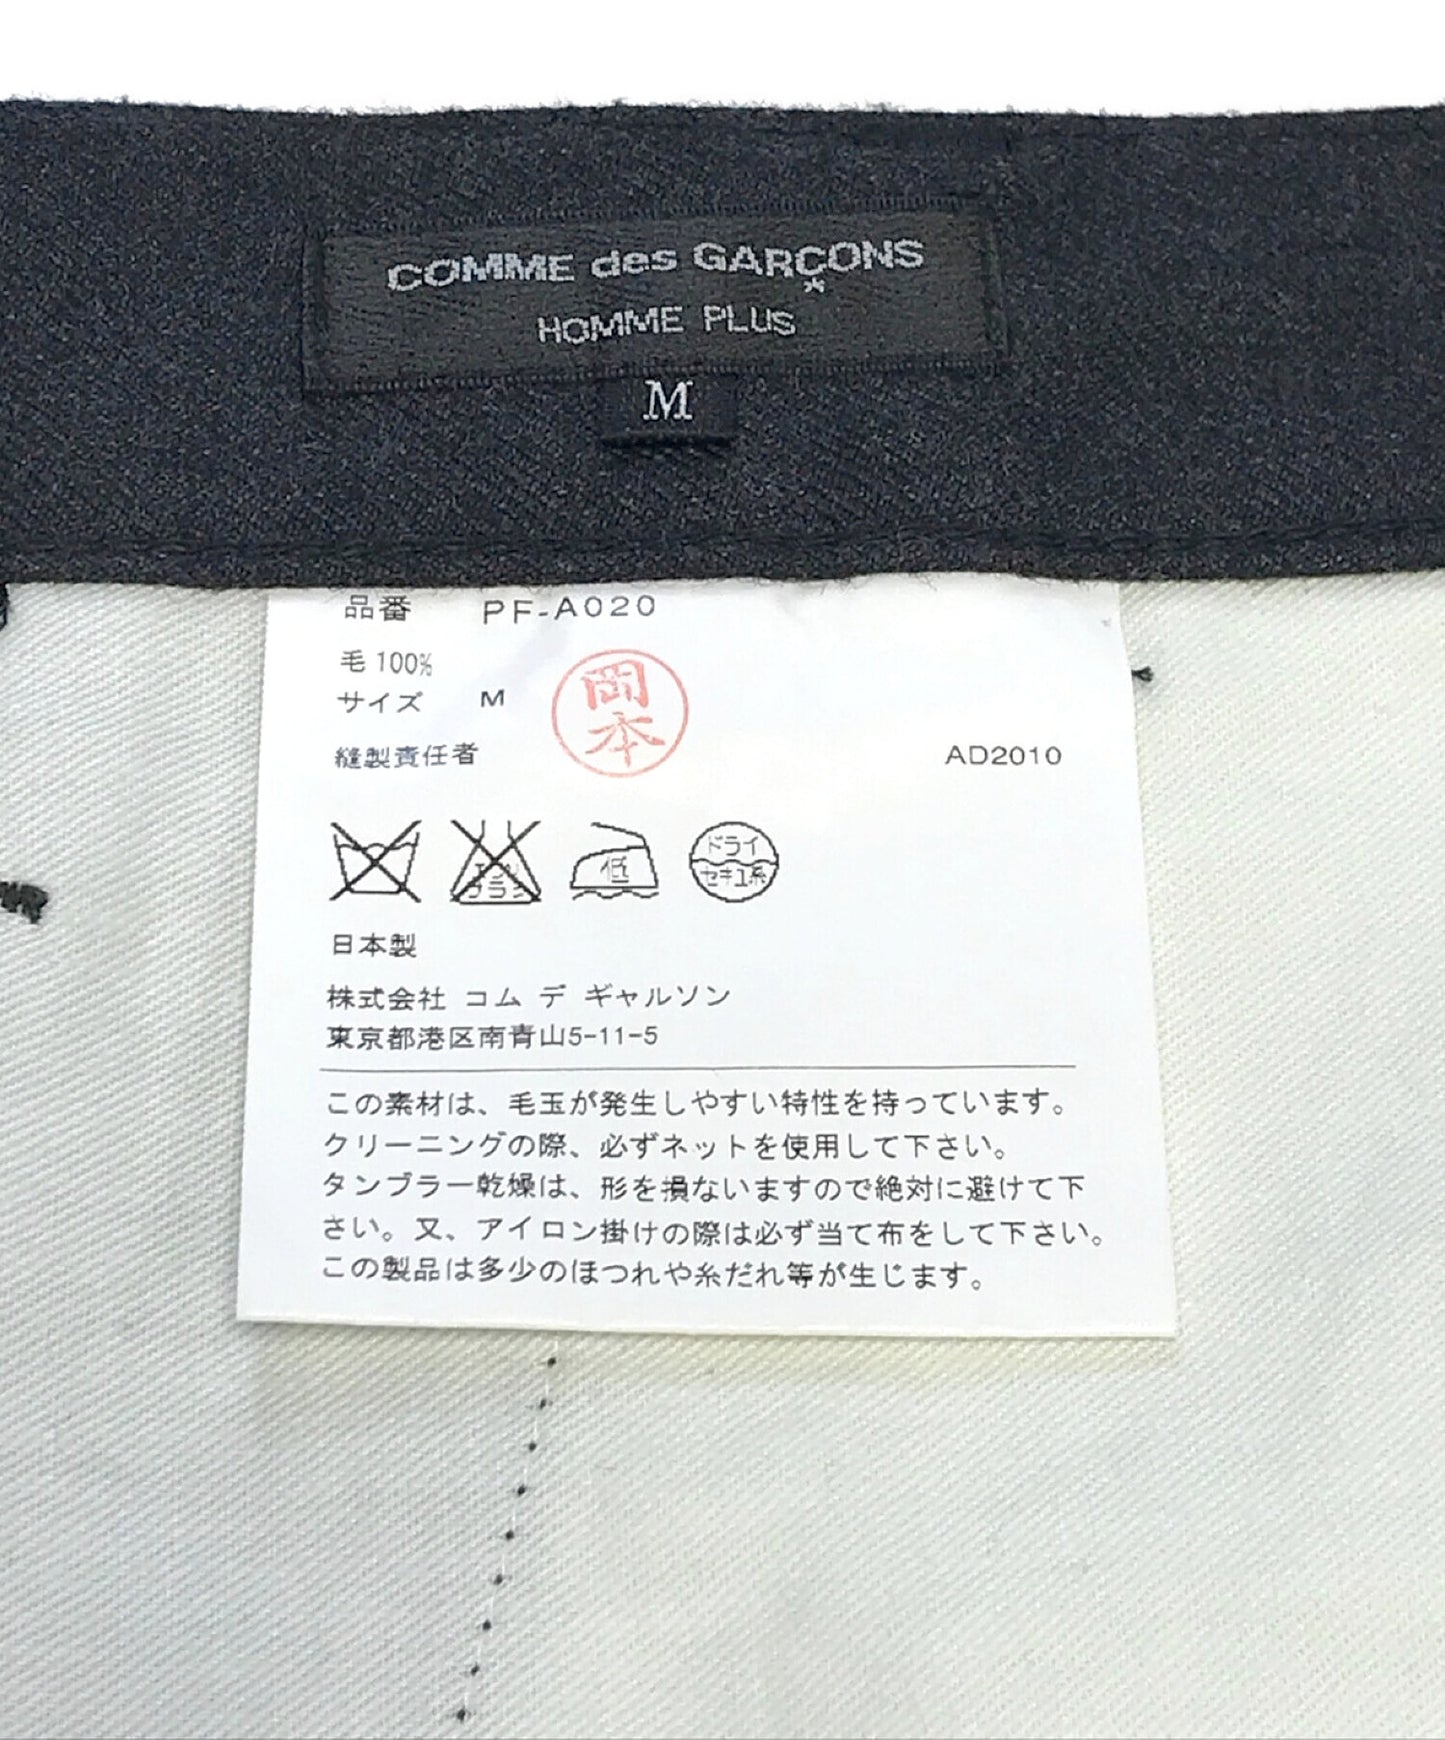 Comme des Garcons Homme Plus 사이드 조정자 반 바지 PF-A020